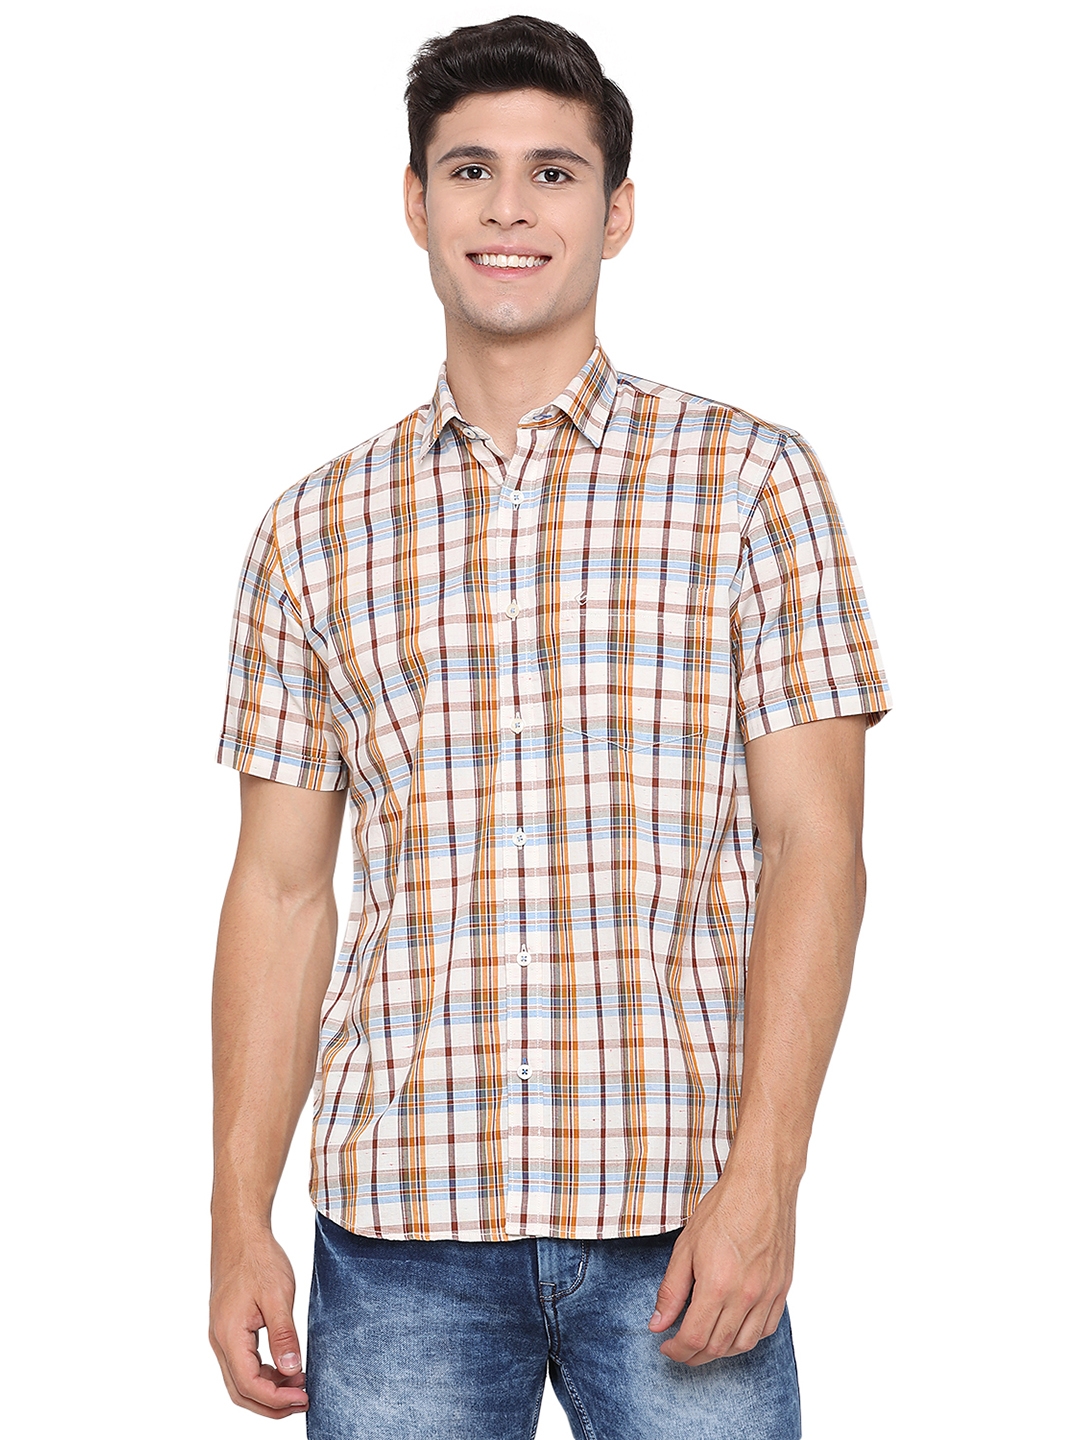 Greenfibre | Antique White Checked Slim Fit Casual Shirt | Greenfibre 0